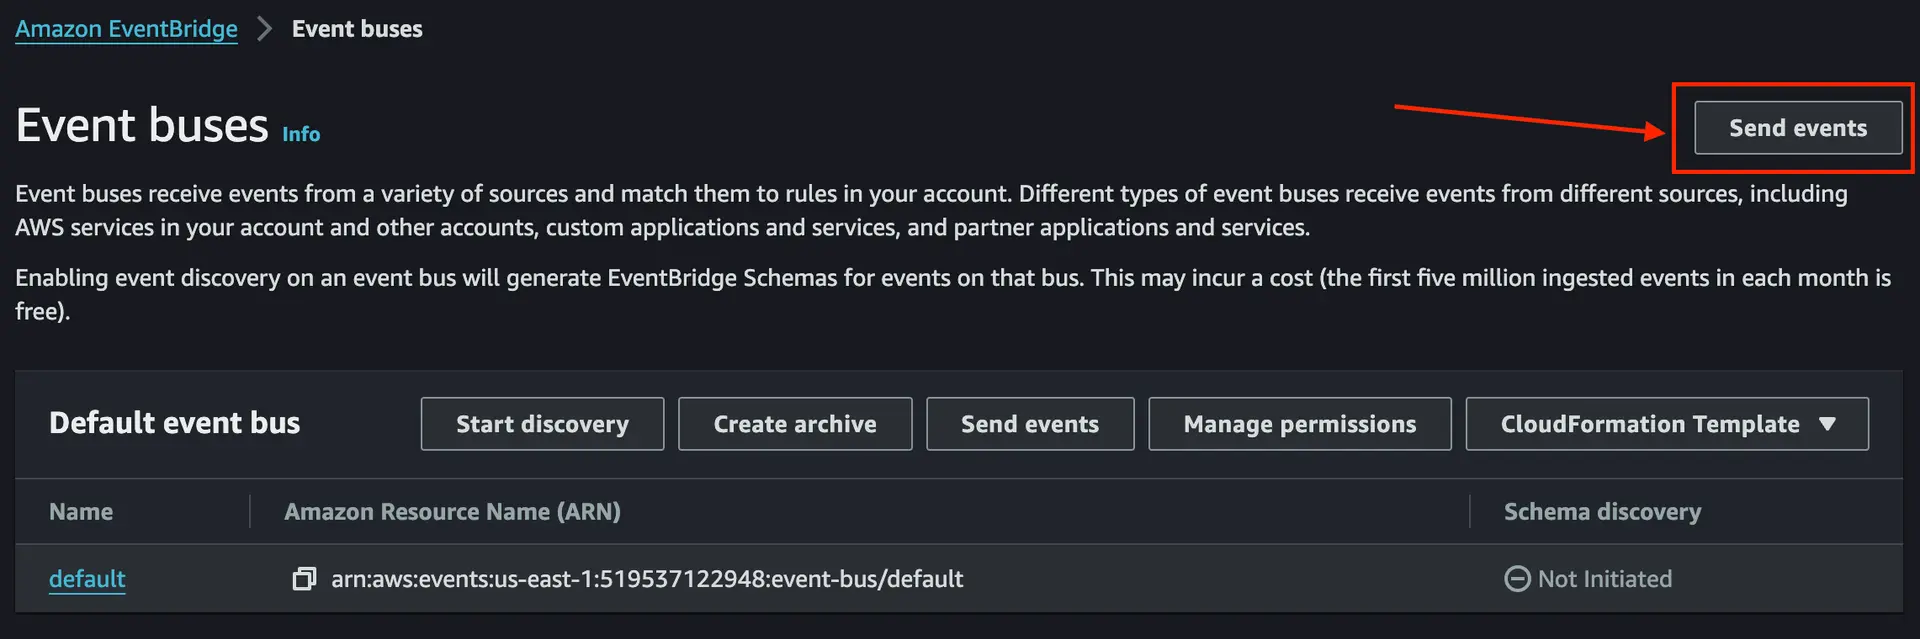 Amazon EventBridge console, page titled “Event buses”. Shows a table of event buses and a highlighted button labeled "Send events."